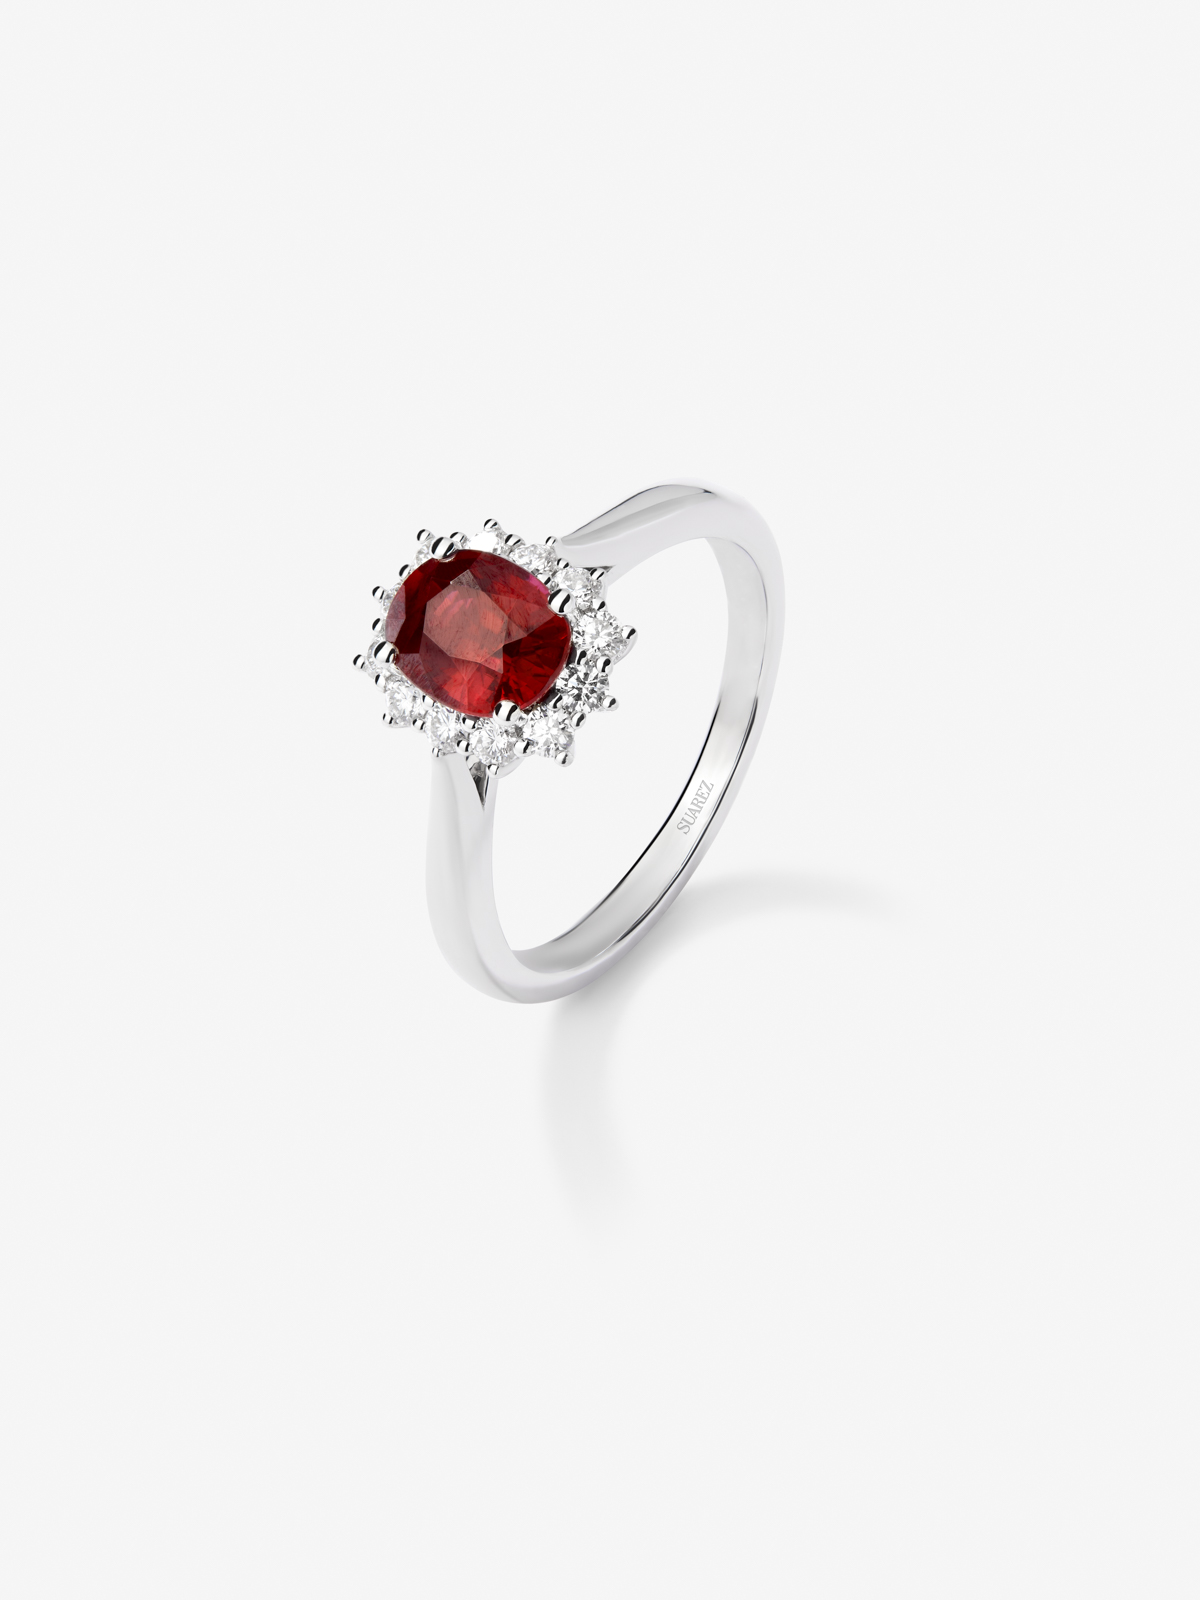 18K White Gold Ring with Red Ruby in 0.68 cts and white diamonds in a brilliant 0.18 cts